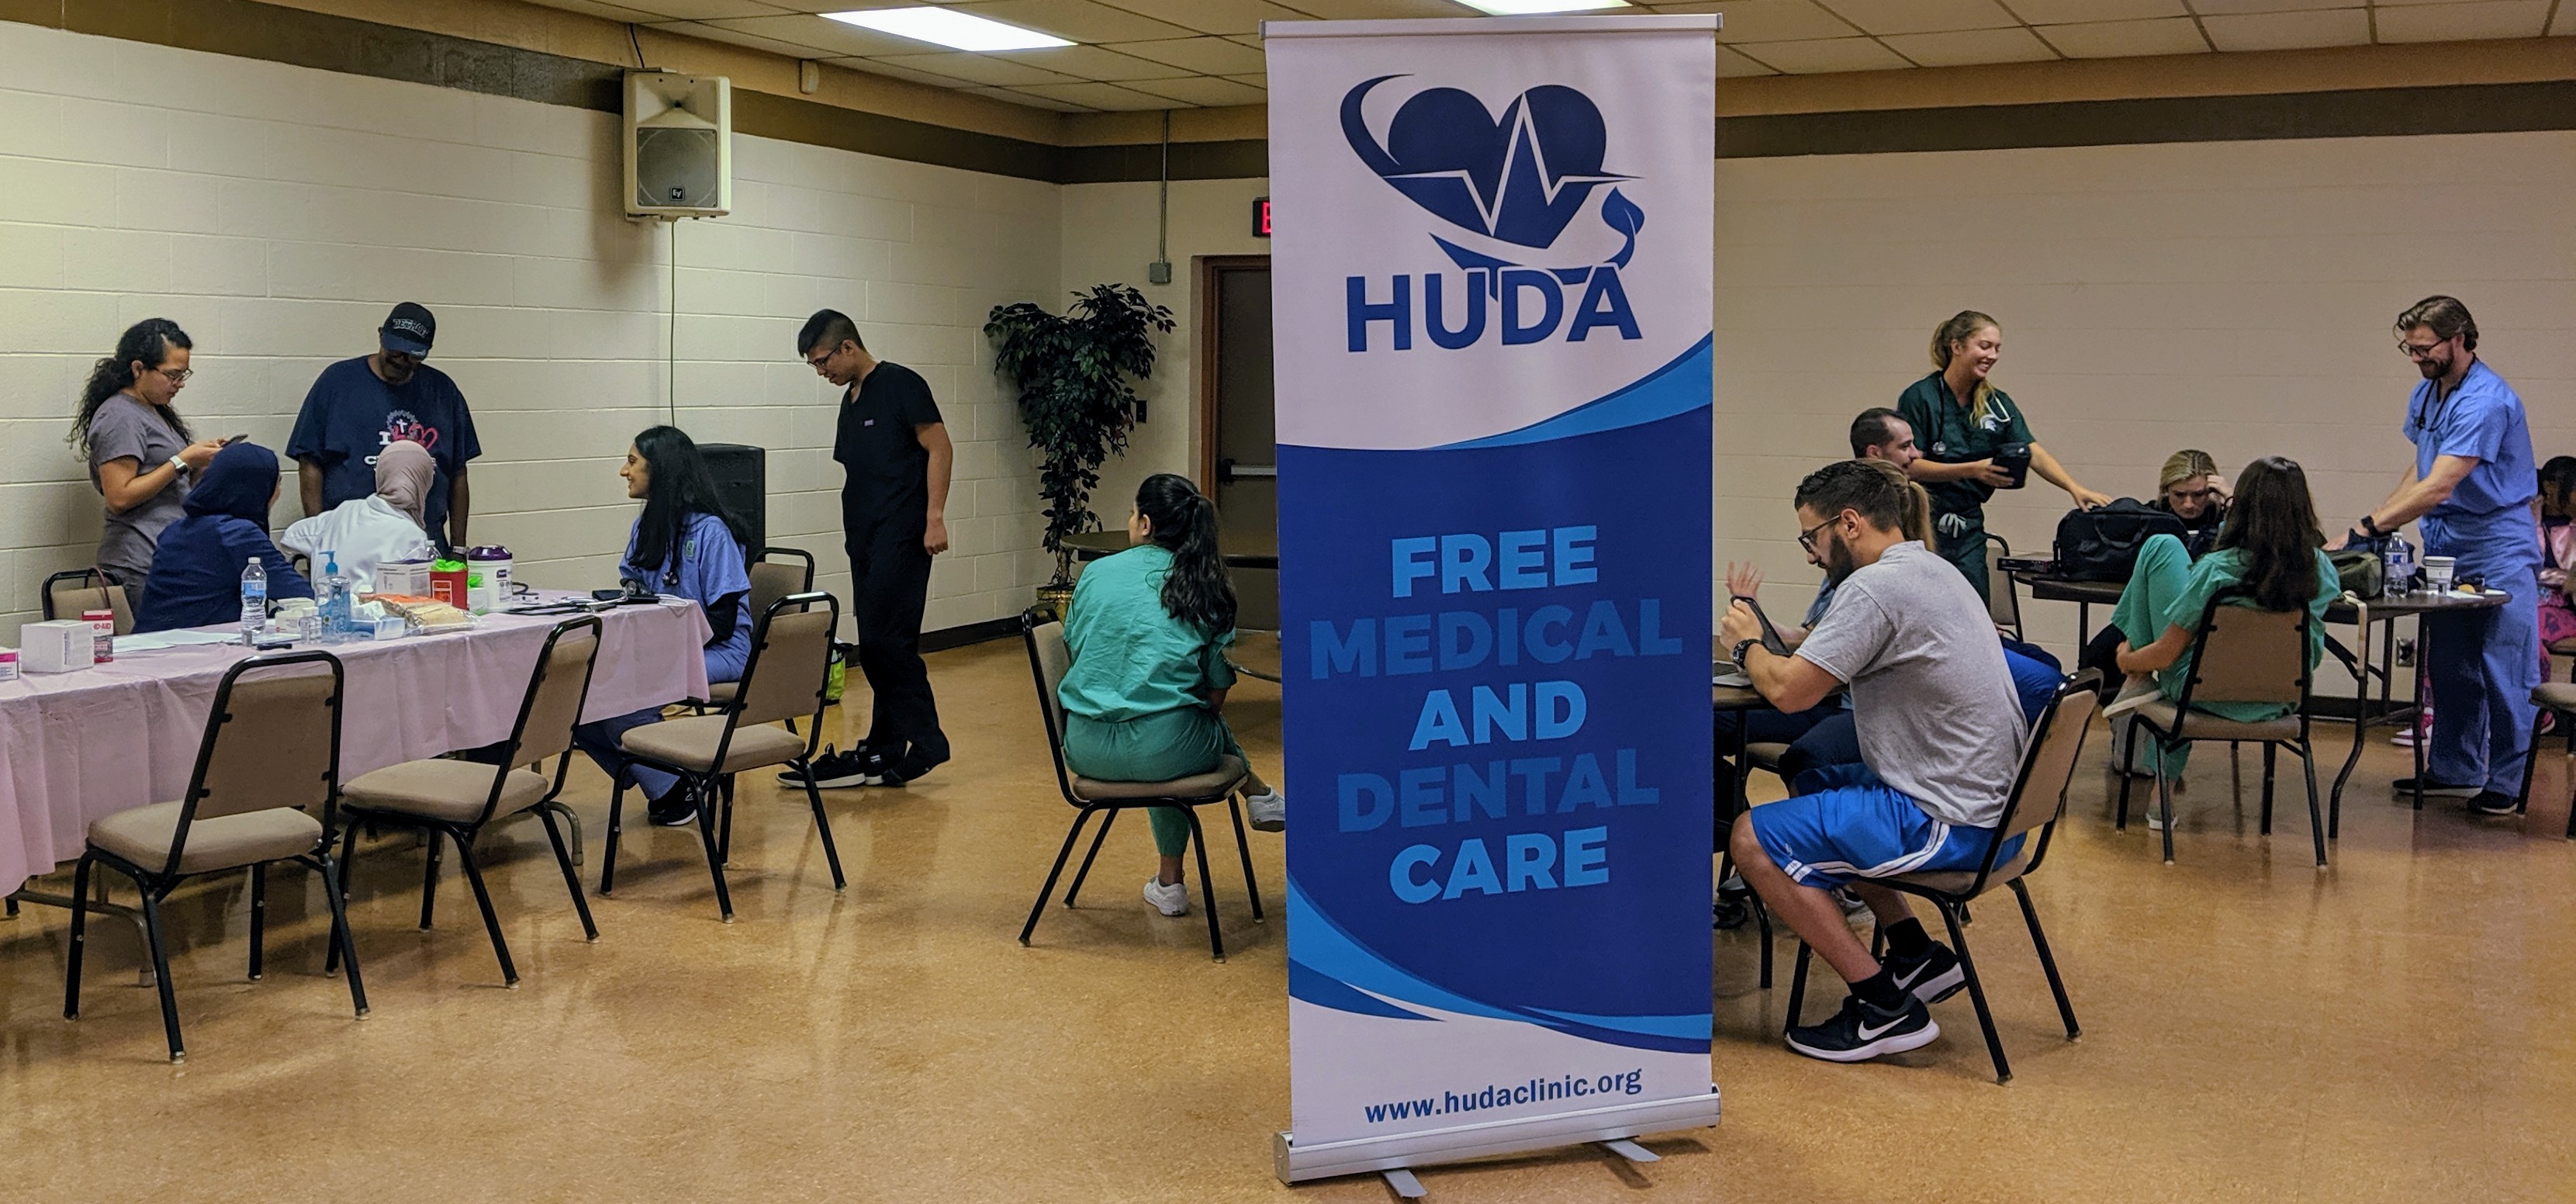 Our clinic offered free health care